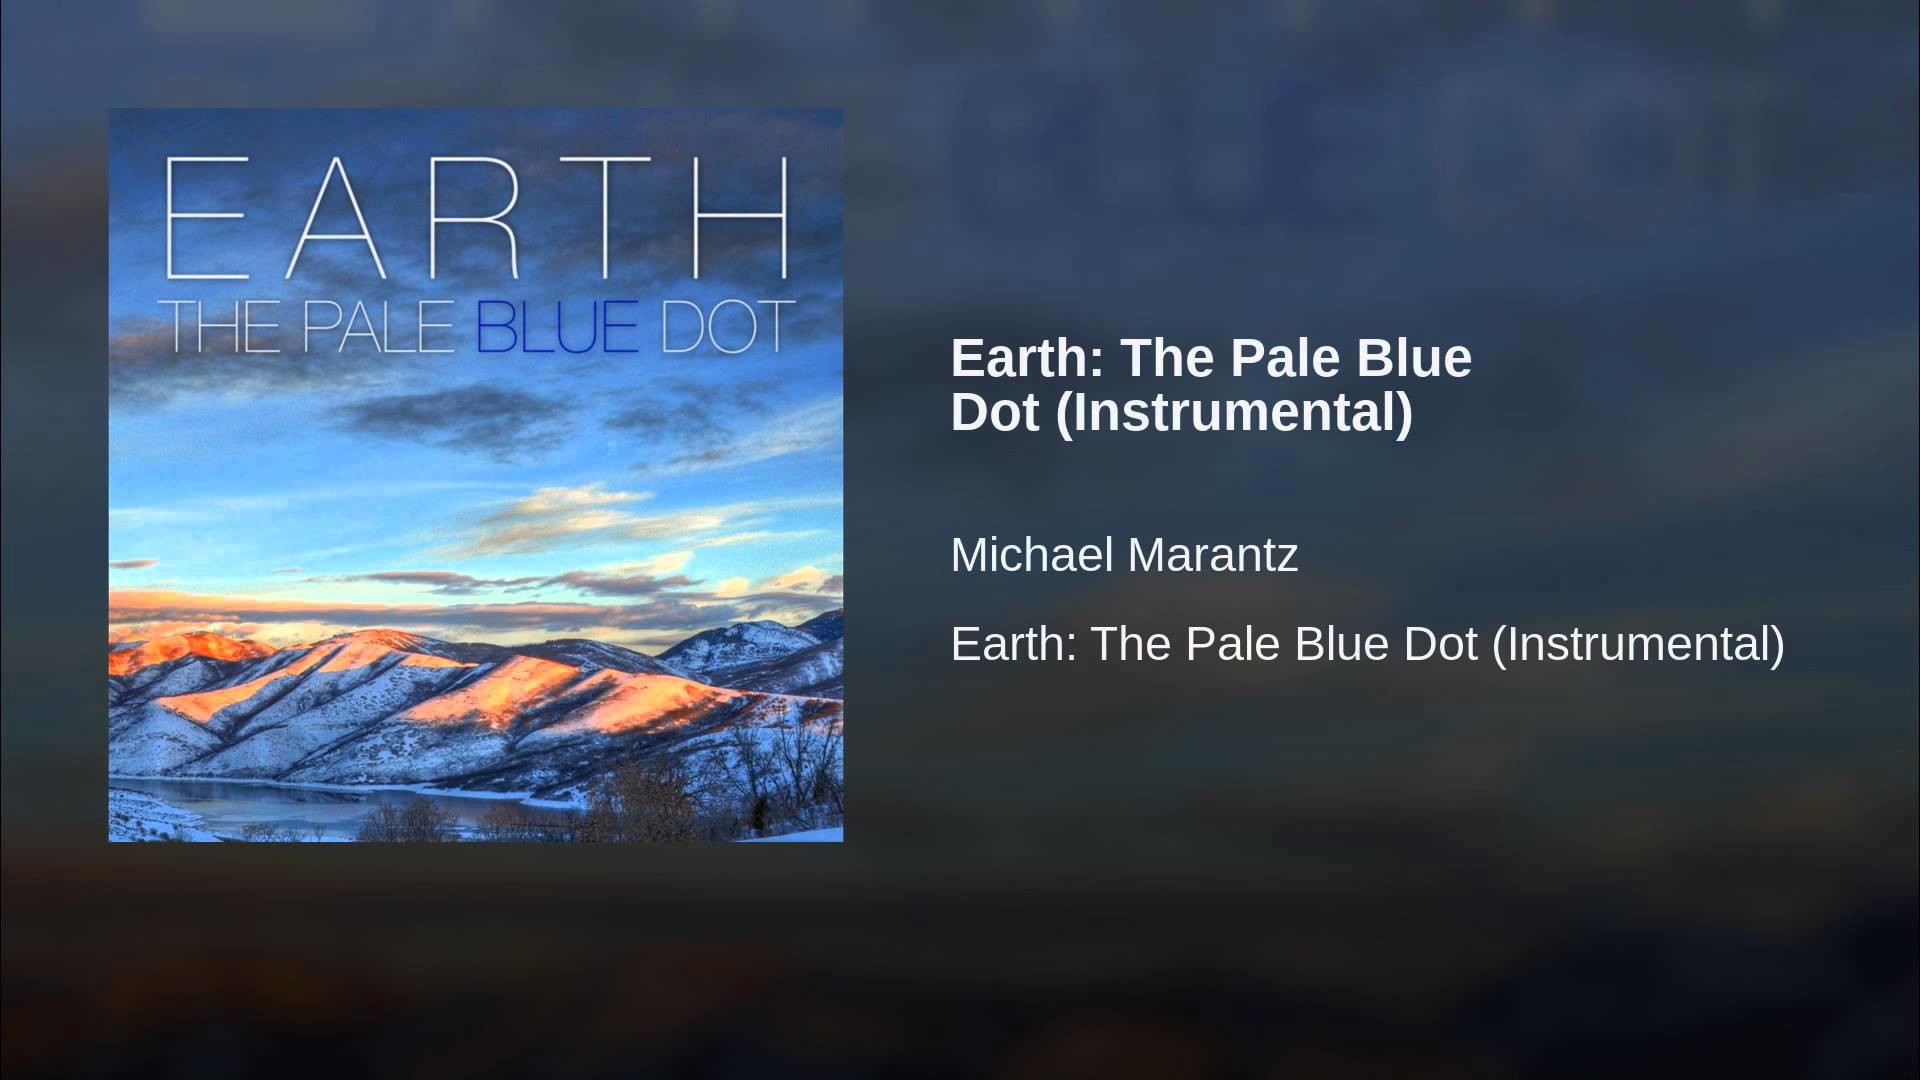 1920x1080 Earth: The Pale Blue Dot (Instrumental)